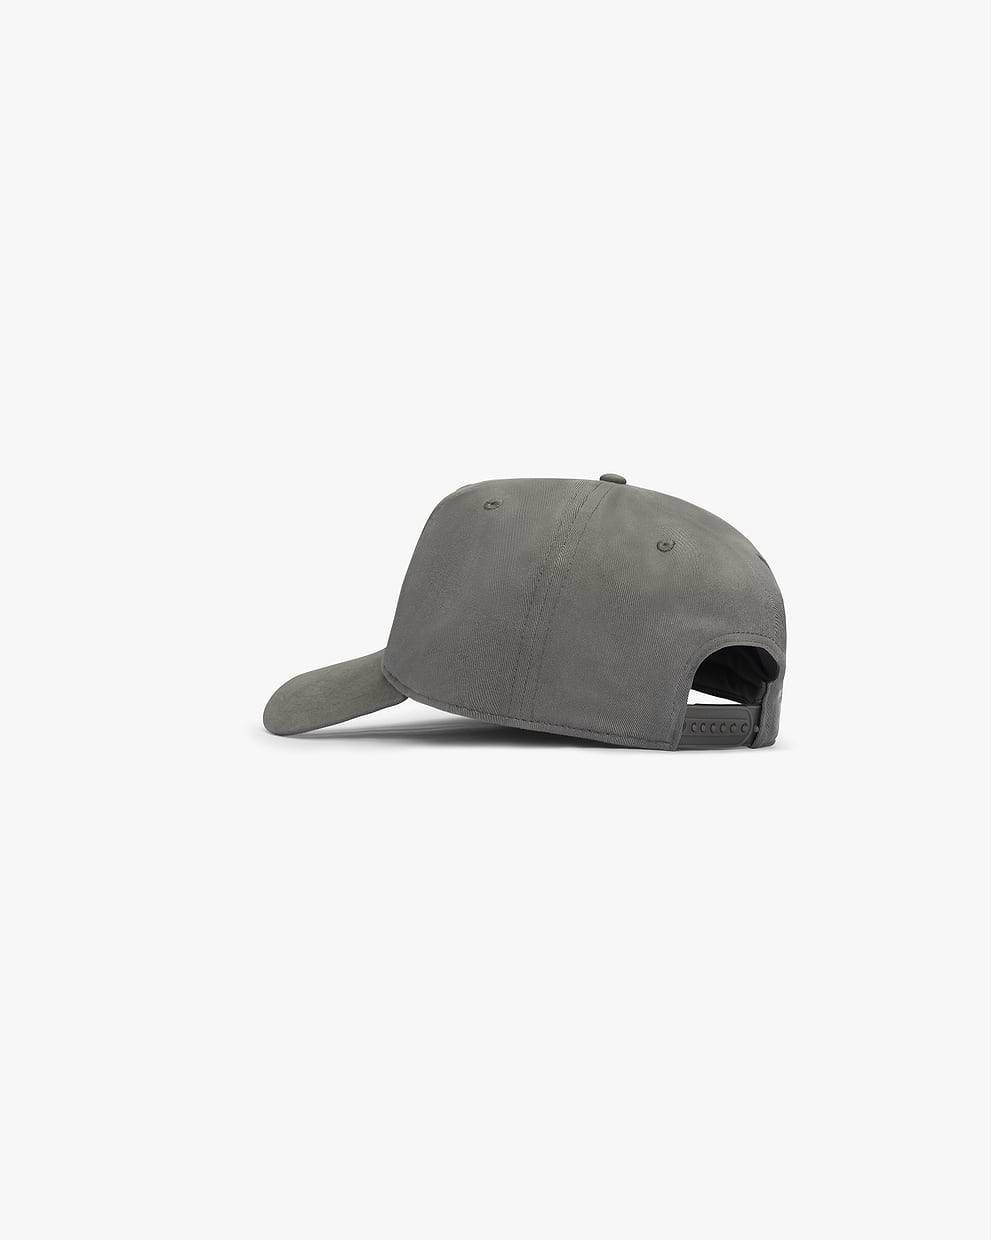 Horizons Cap - Washed Taupe